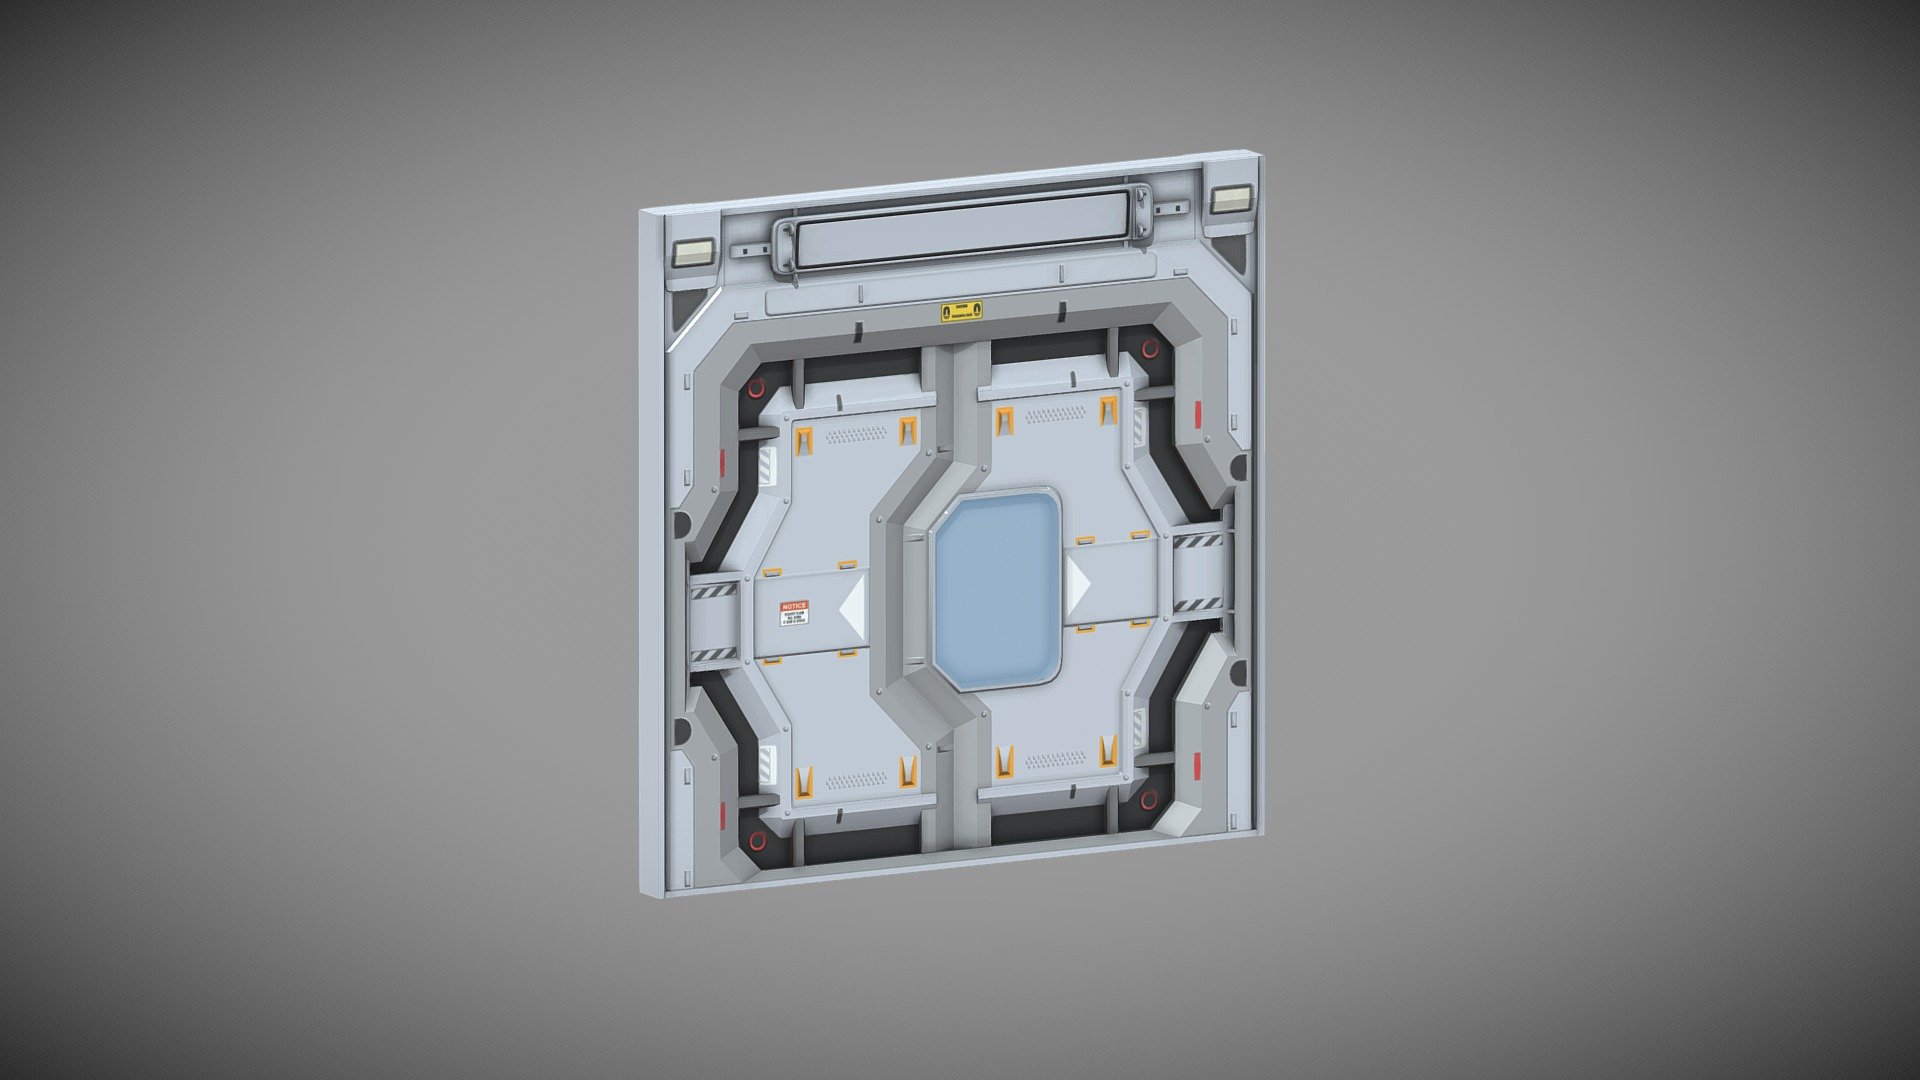 Sci-Fi Level Kit AAA: Door A
Textures: 2048x2048, diffuse, normal, specular.  

Part of the Sci-Fi Level Kit AAA. Available on Asset Store.

About Sci-Fi Level Kit AAA:

Complete kit of 43 interior items for sci-fi, lab or spaceship environment of AAA-quality. 

Gameready lowpolies baked with love from cinematic highpolies. Each model contain textures: 2048x2048, diffuse, normal, specular. Concept design by of the top AAA artists. Production cost over $10,000. Make your own level design on Unity competitive to Deus Ex: Human Revolution, Deus Ex: Mankind Divided, Syndicate 2012, Mass Effect and Star Citizen benchmarks! 

Preview for each of the items attached via Sketchfab (rotate, zoom, enjoy). 

（╹◡╹） - Sci-Fi Level Kit AAA: Door A - 3D model by blackcloudstudios 3d model